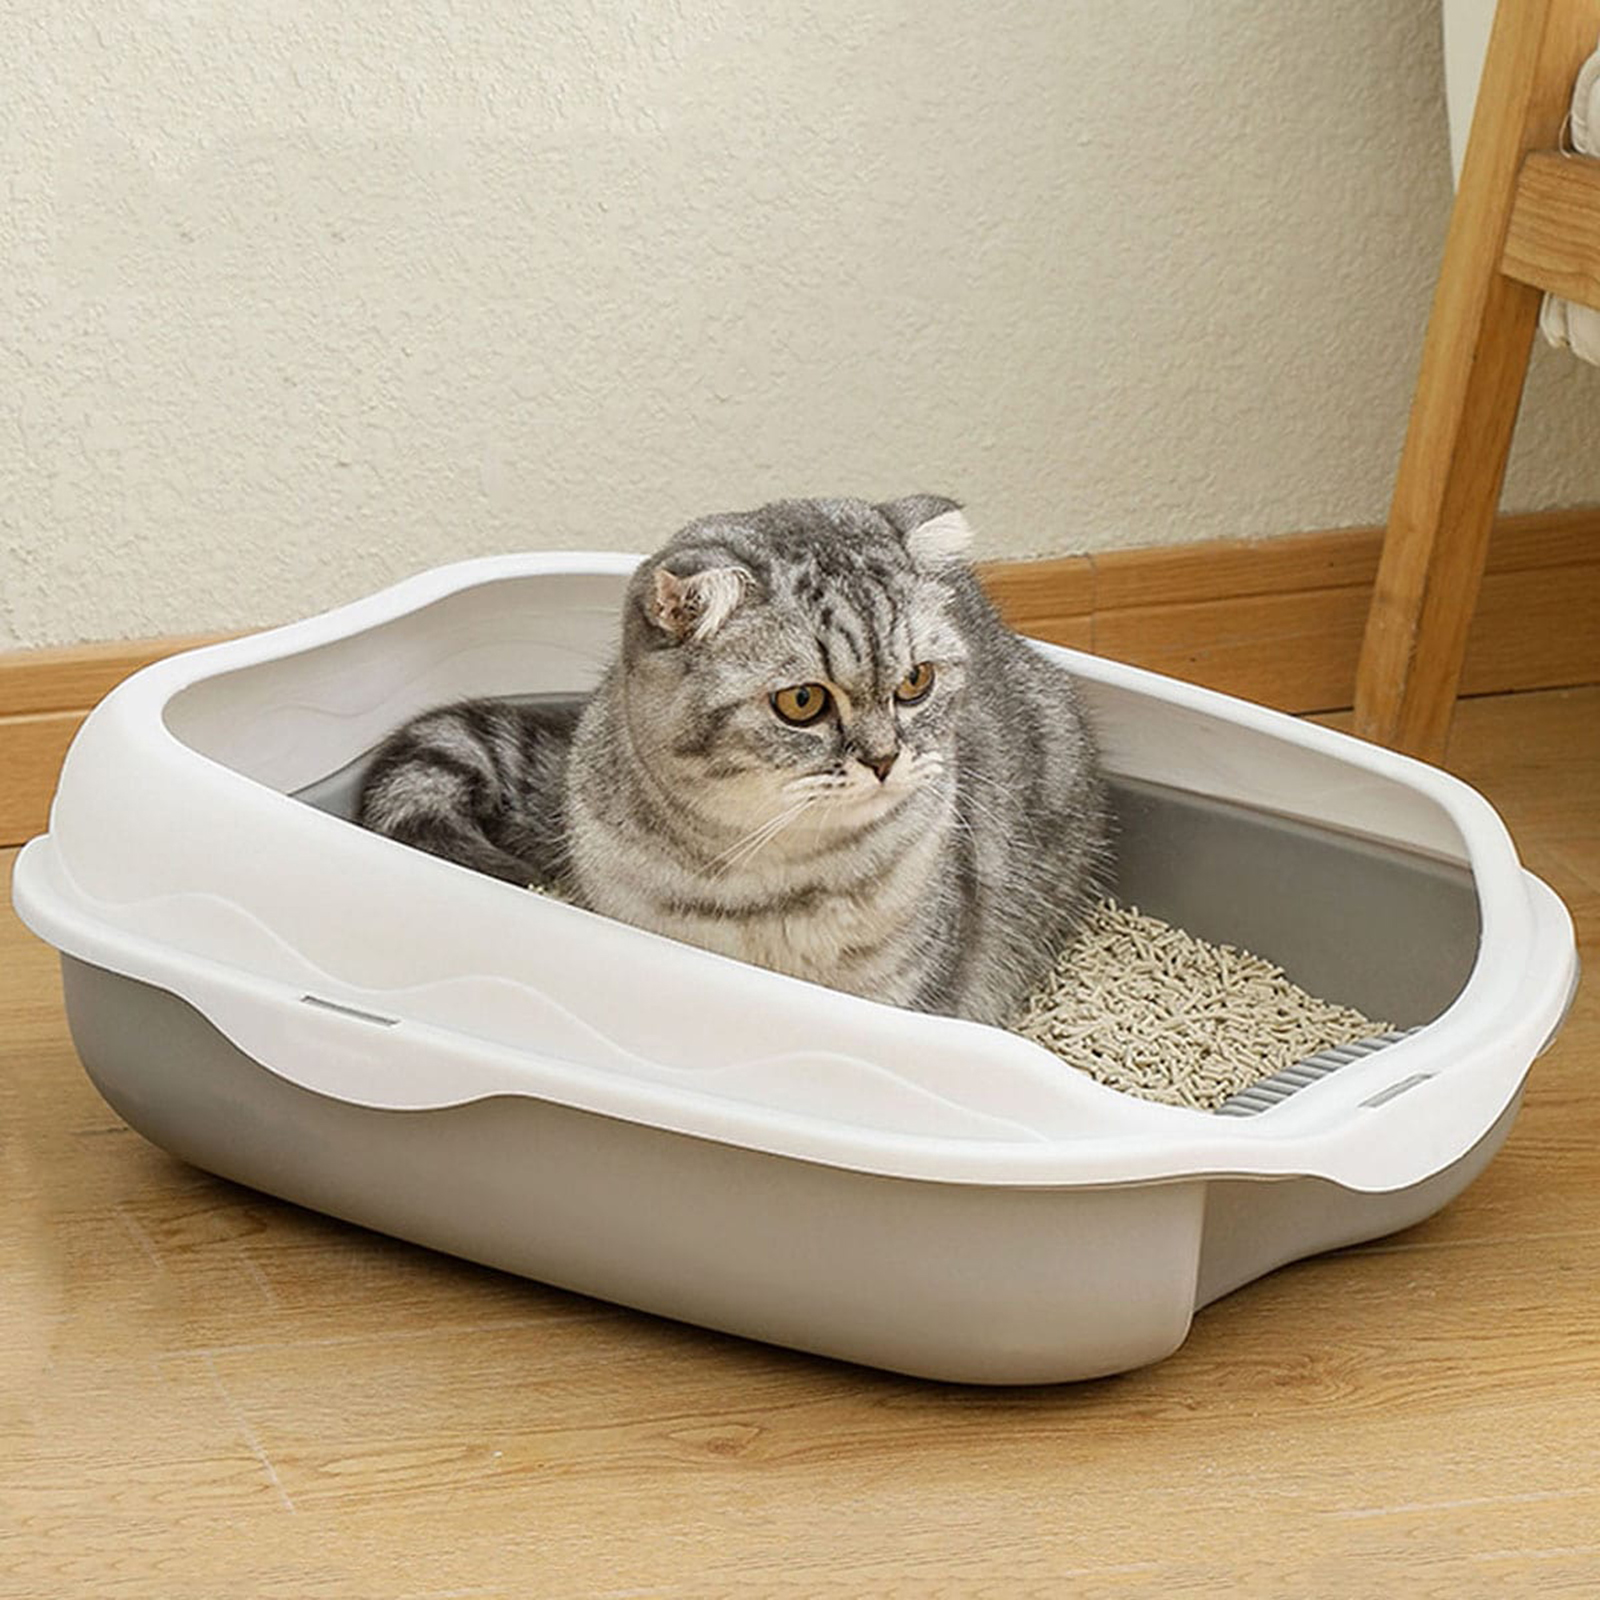 BESTHUA Enclosed Cat Litter Box Semi-Enclosed Sifting Litter Box With High  Sides Detachable Shallow Cat Toilet Prevents Urine and Litter Leakage